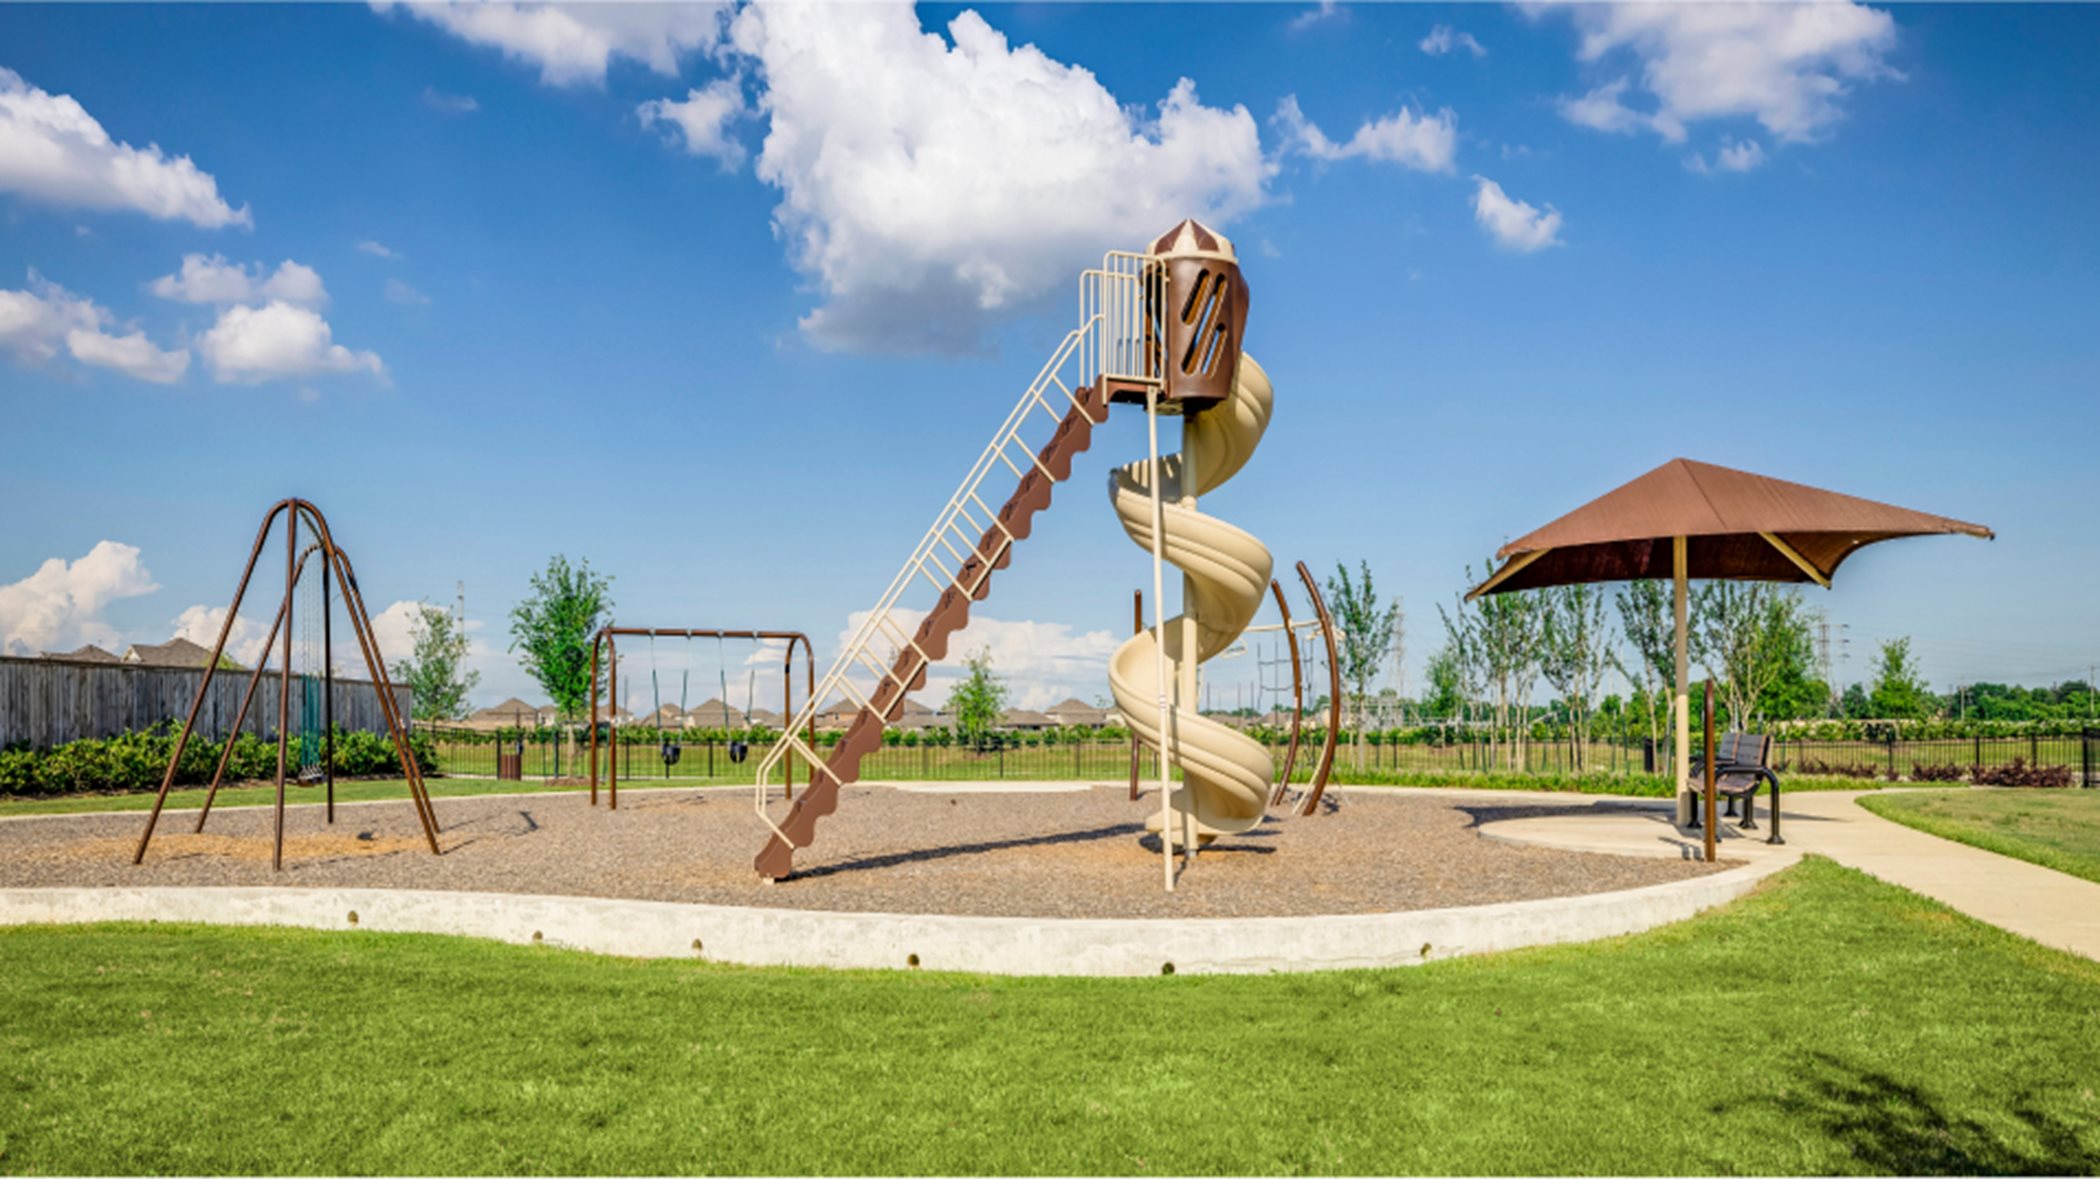 Wooster Trails At Baytown Crossings Playground